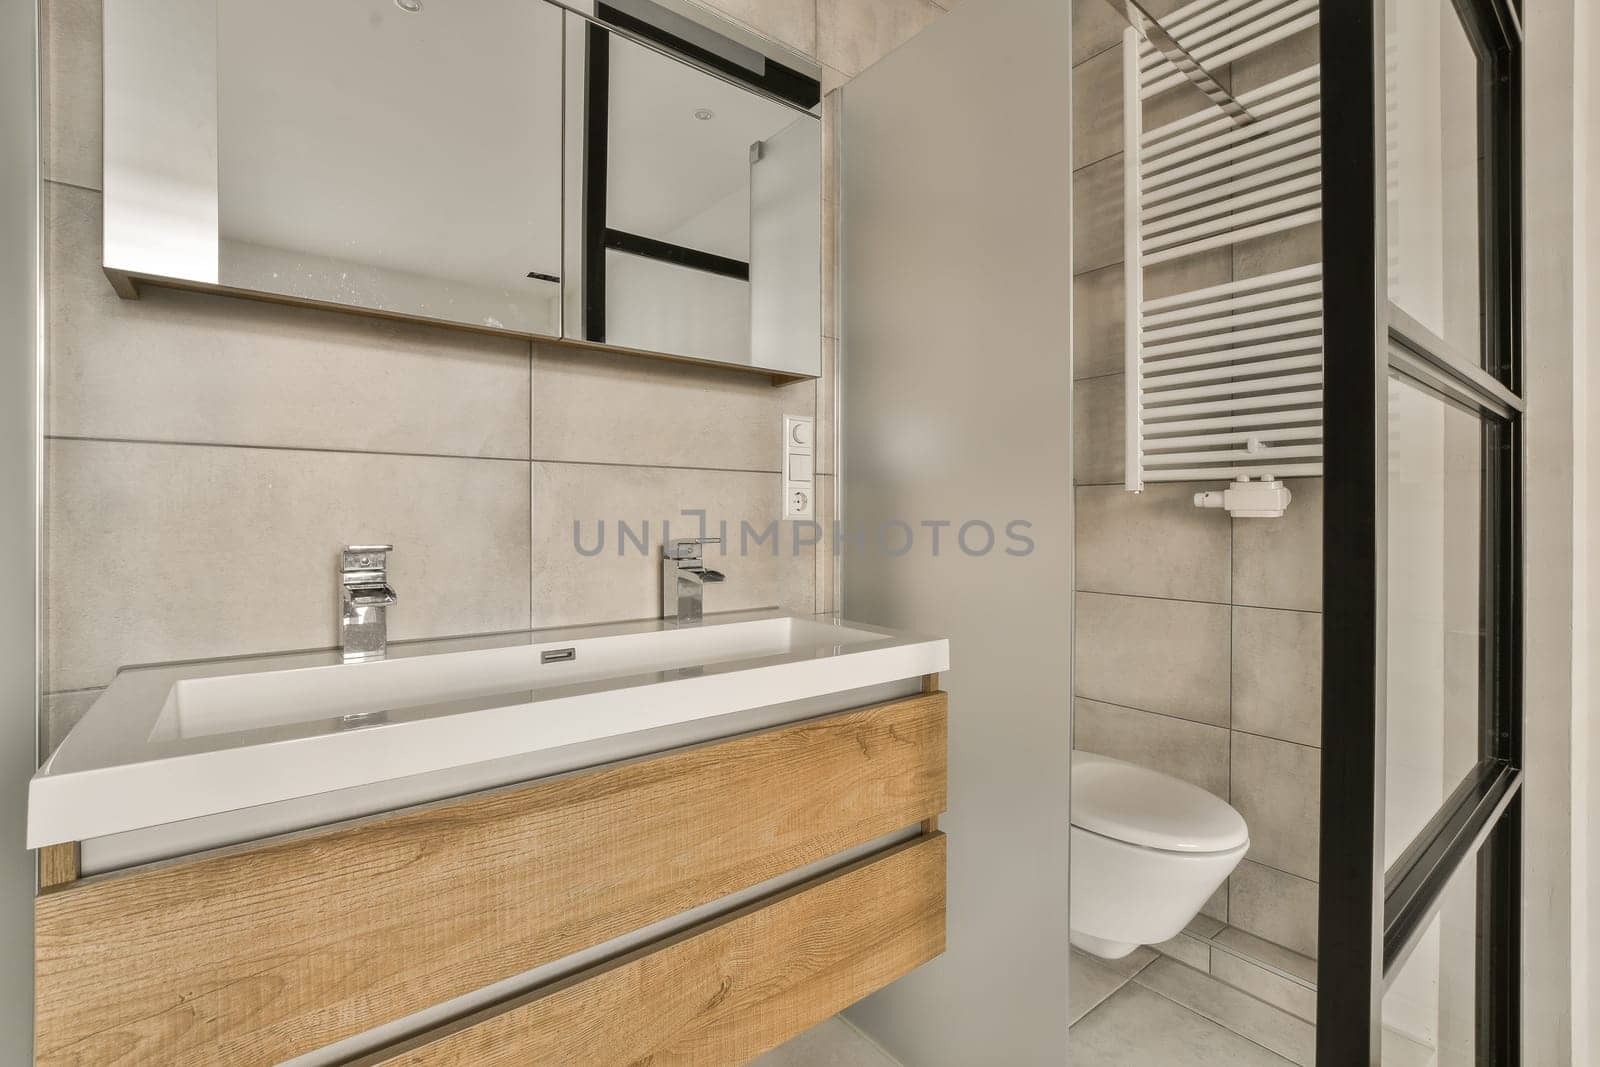 a modern bathroom with wood cabinets and white tiles on the walls, along with a toilet in the middle part of the room